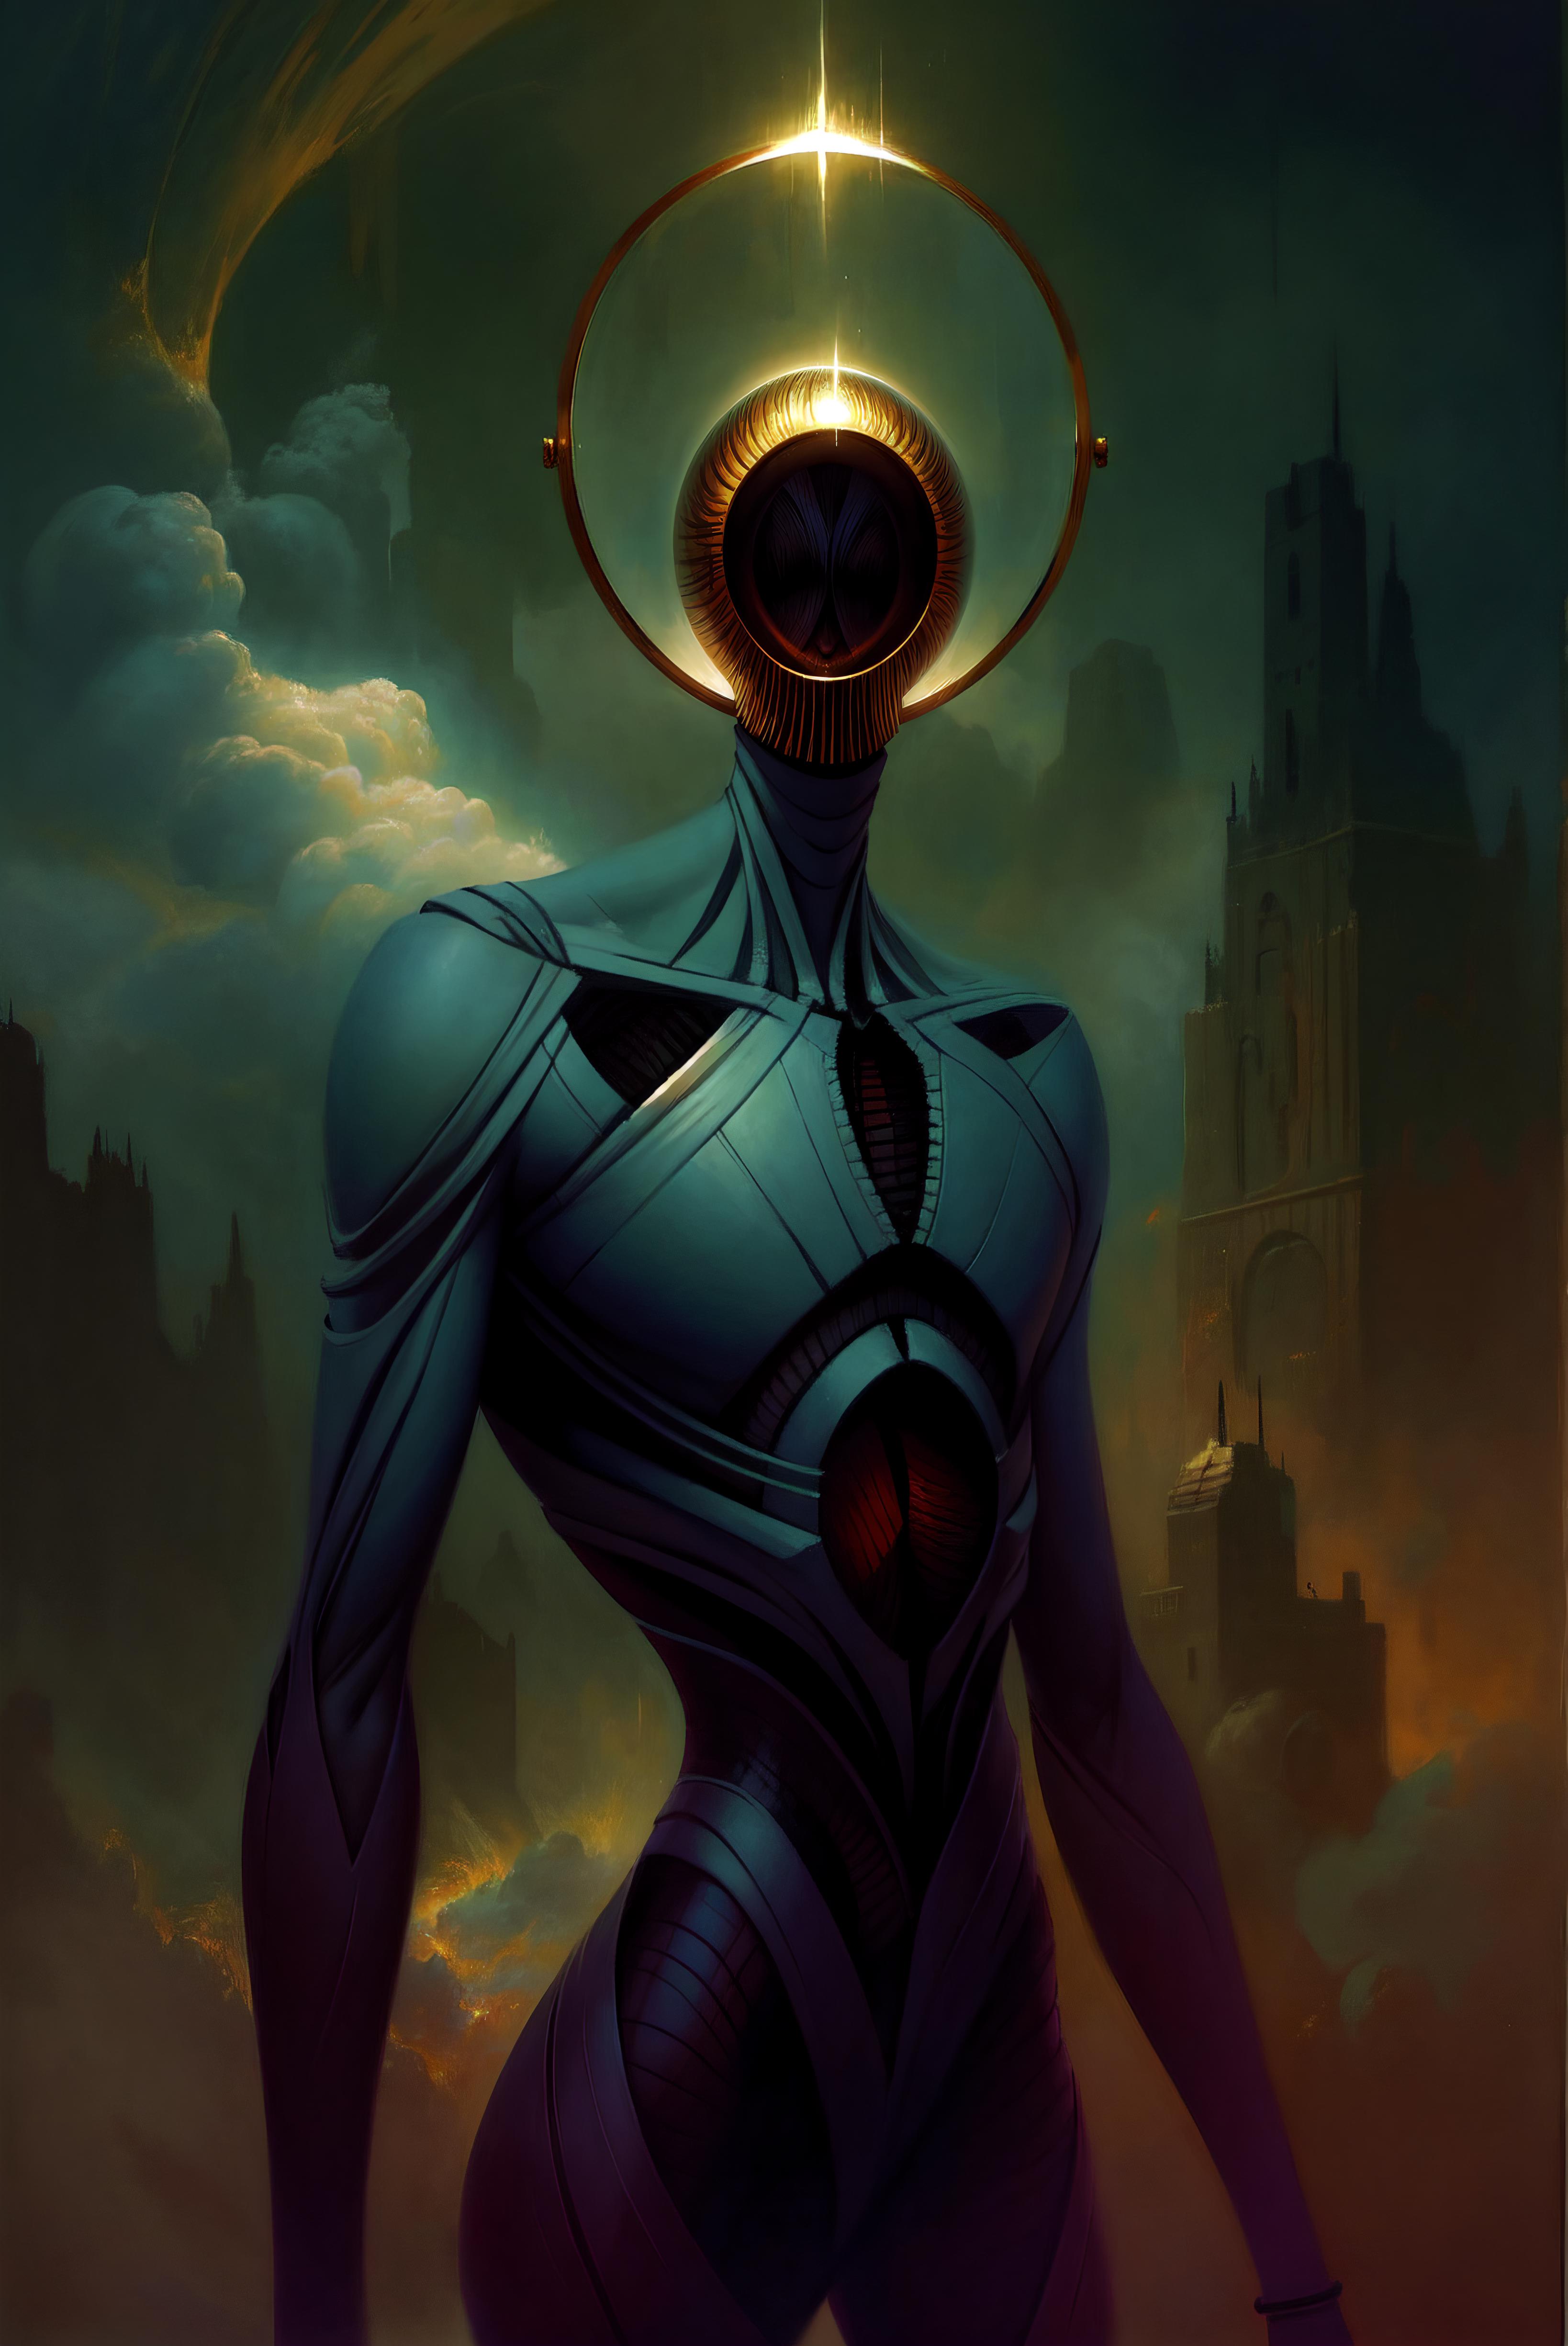 A Dark and Mysterious Artwork Featuring a Robotic Human Figure with a Large Golden Head and a Glowing Eye.